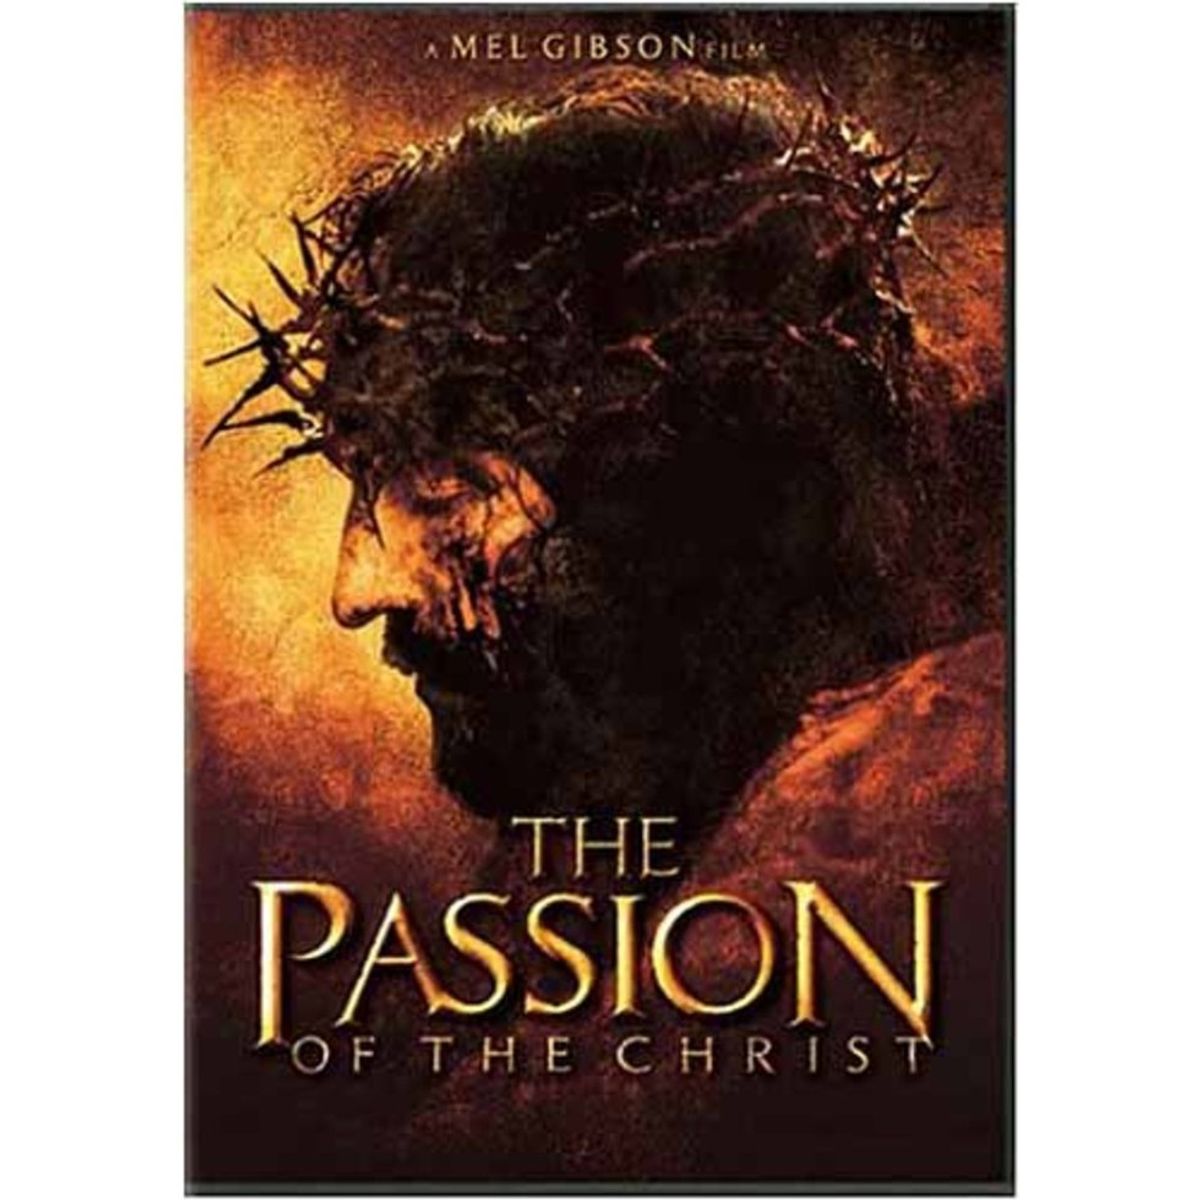 10 Trivia Facts You May Not Know About "The Passion of the Christ"